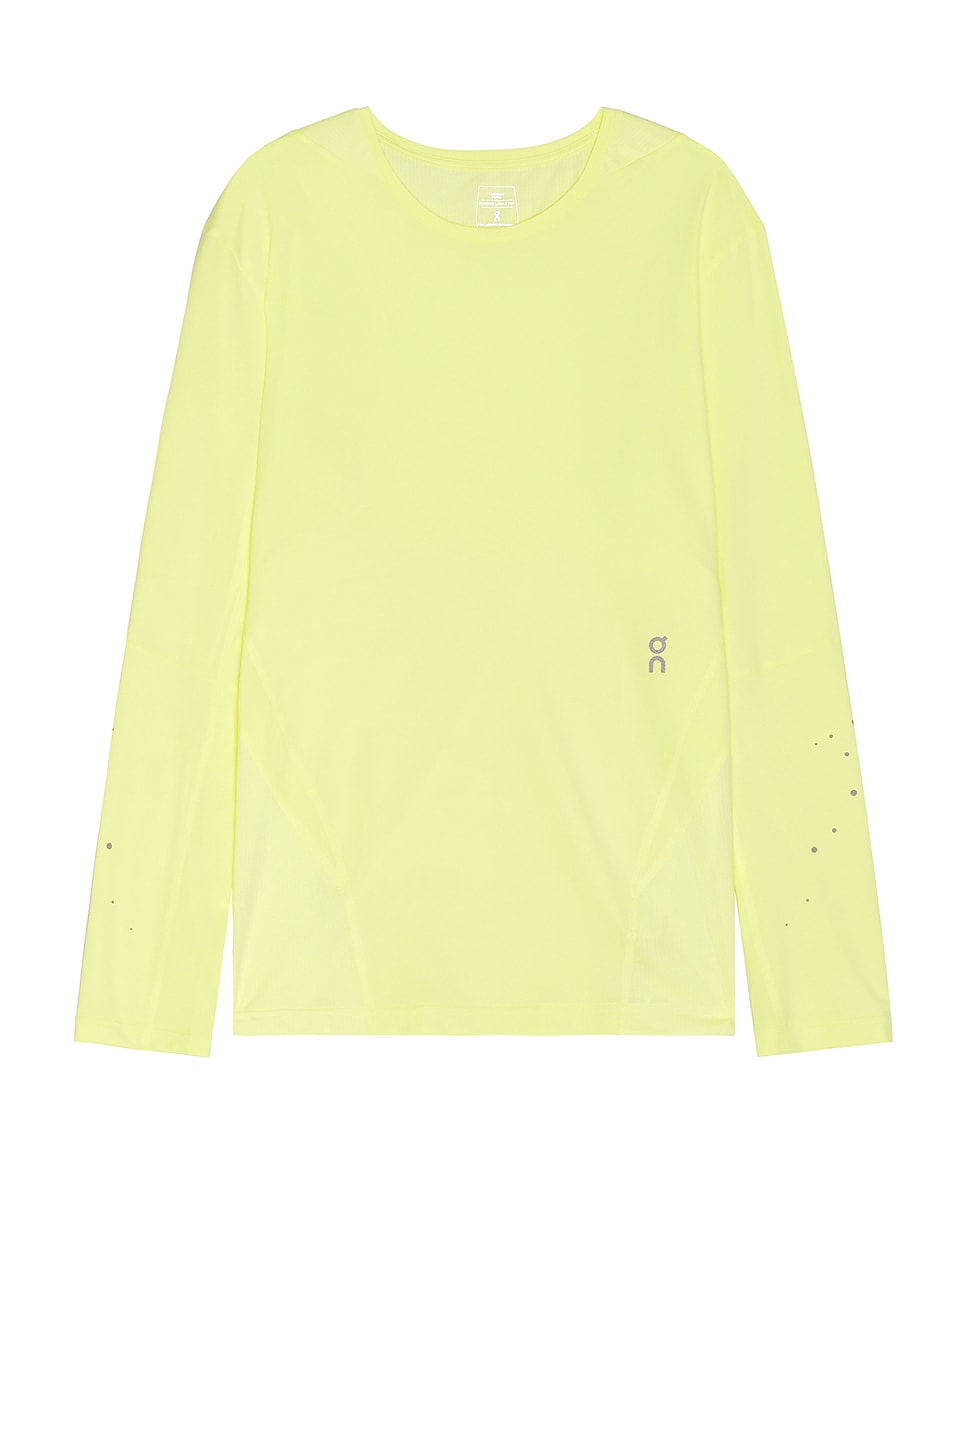 x Post Archive Faction (PAF) Long T-shirt in Yellow